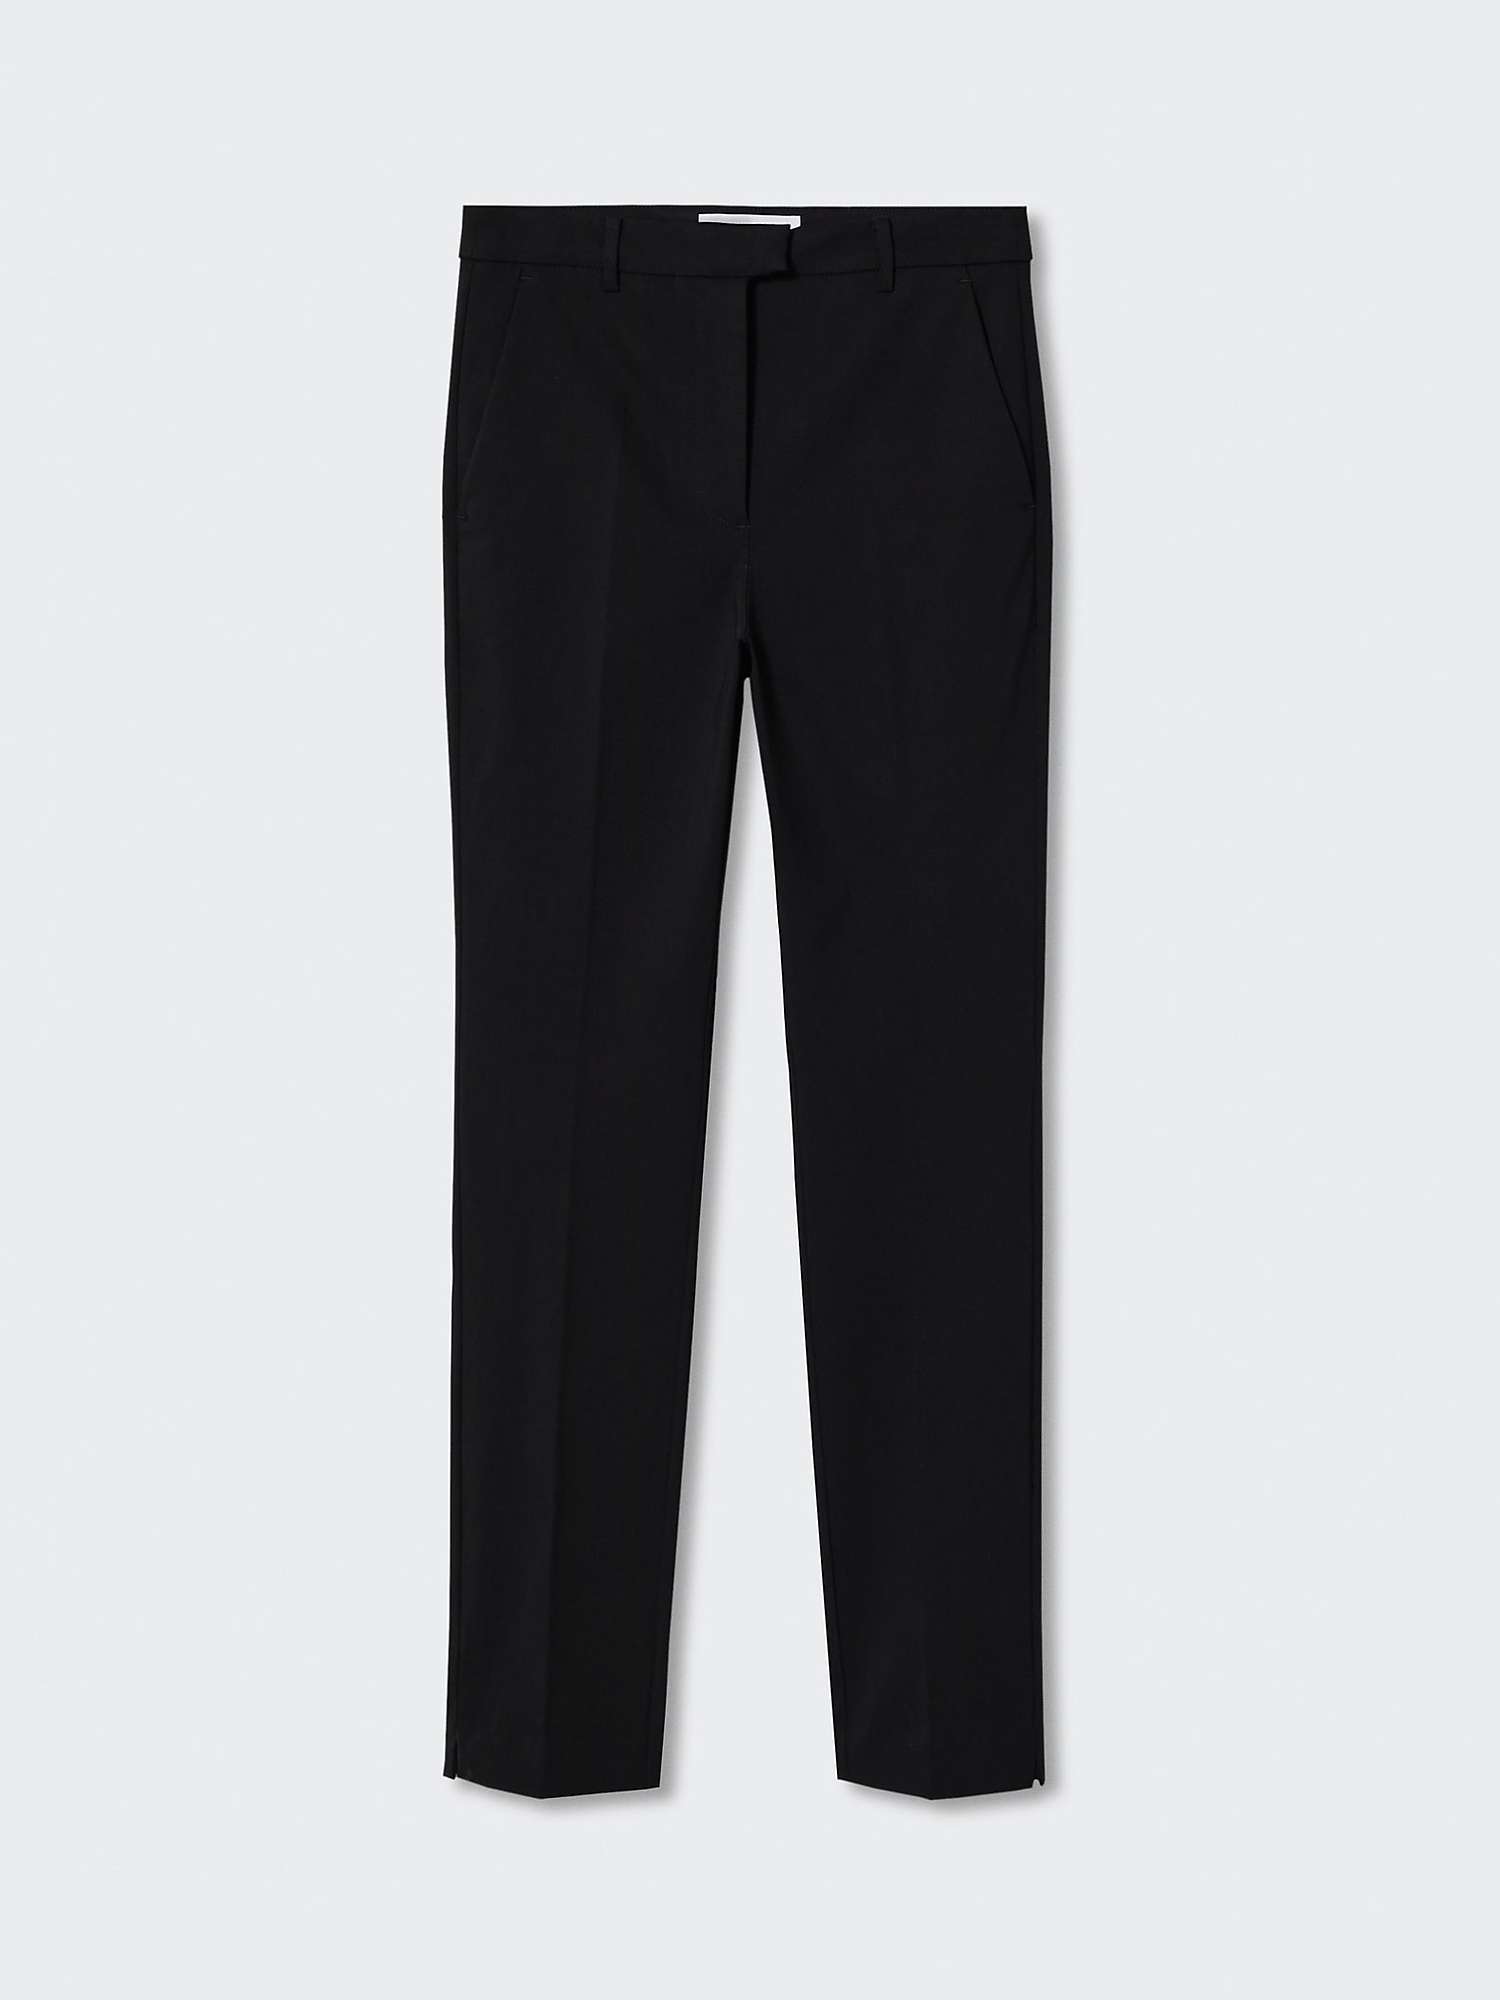 Buy Mango Cola Skinny Fit Trousers Online at johnlewis.com